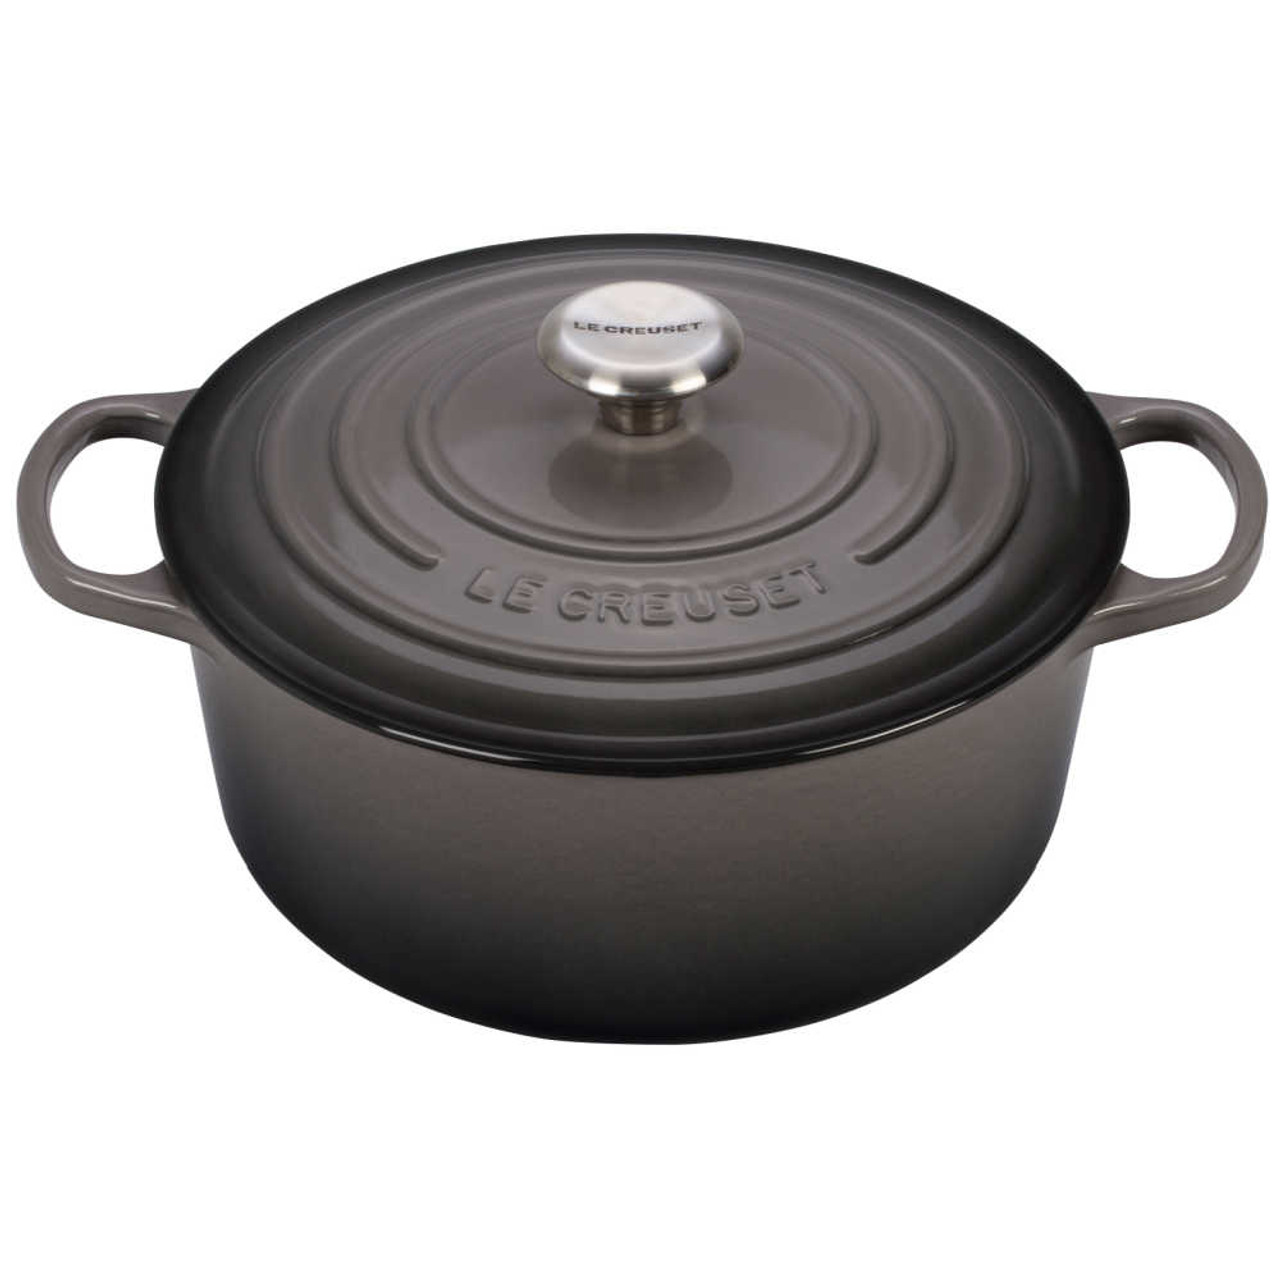 https://cdn11.bigcommerce.com/s-hccytny0od/images/stencil/1280x1280/products/1793/17600/Le_Creuset_Round_Dutch_Oven_Oyster__35394.1639879632.jpg?c=2?imbypass=on